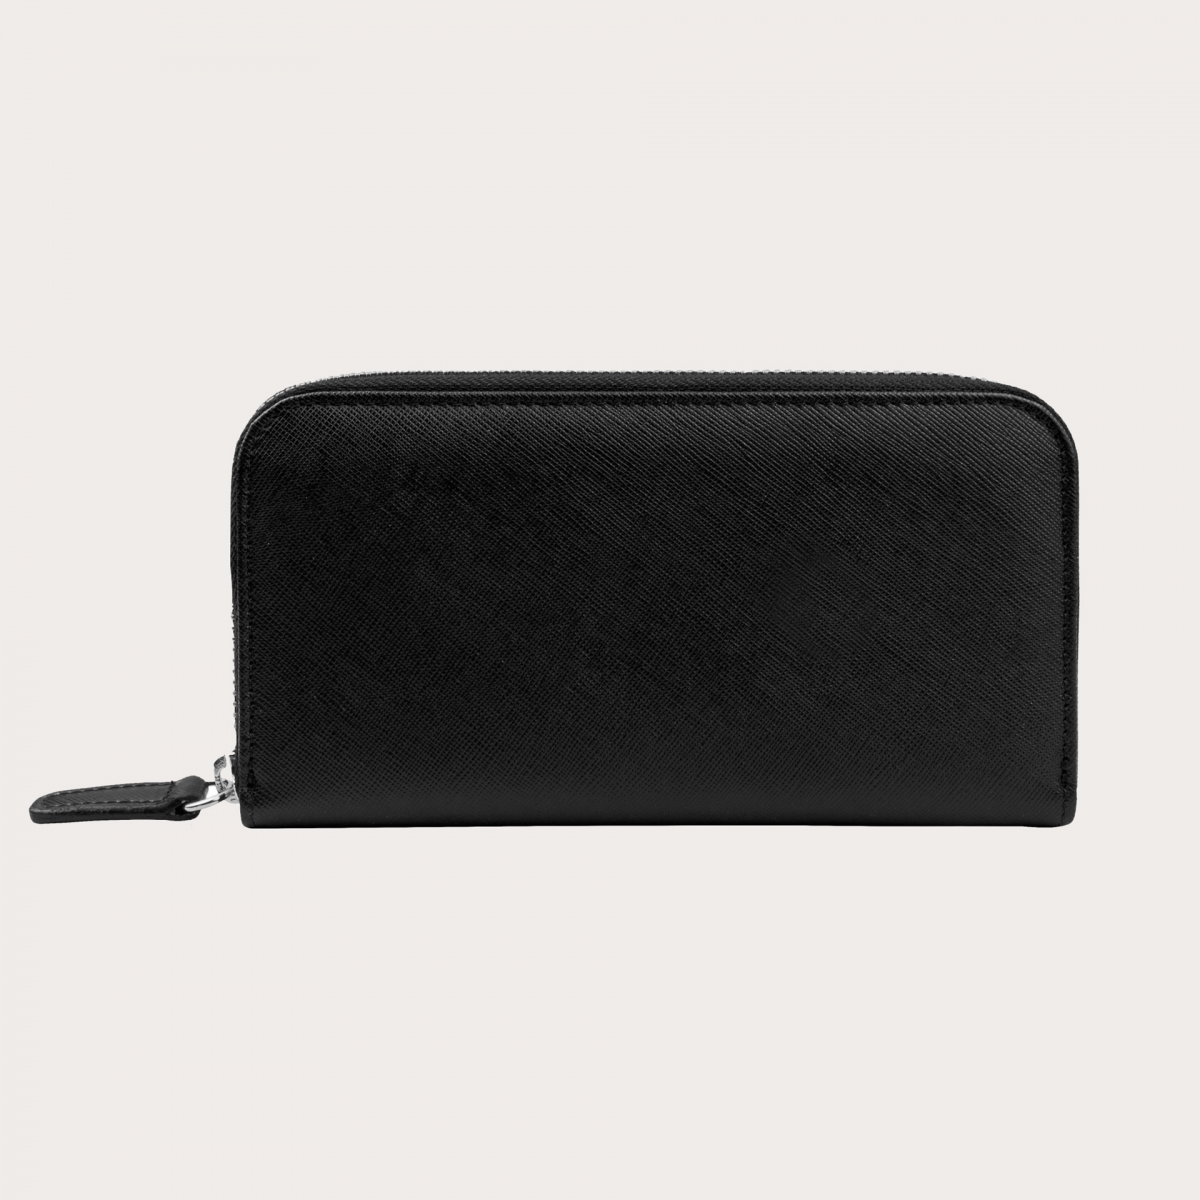 BRUCLE Business wallet in saffiano print leather, classic black